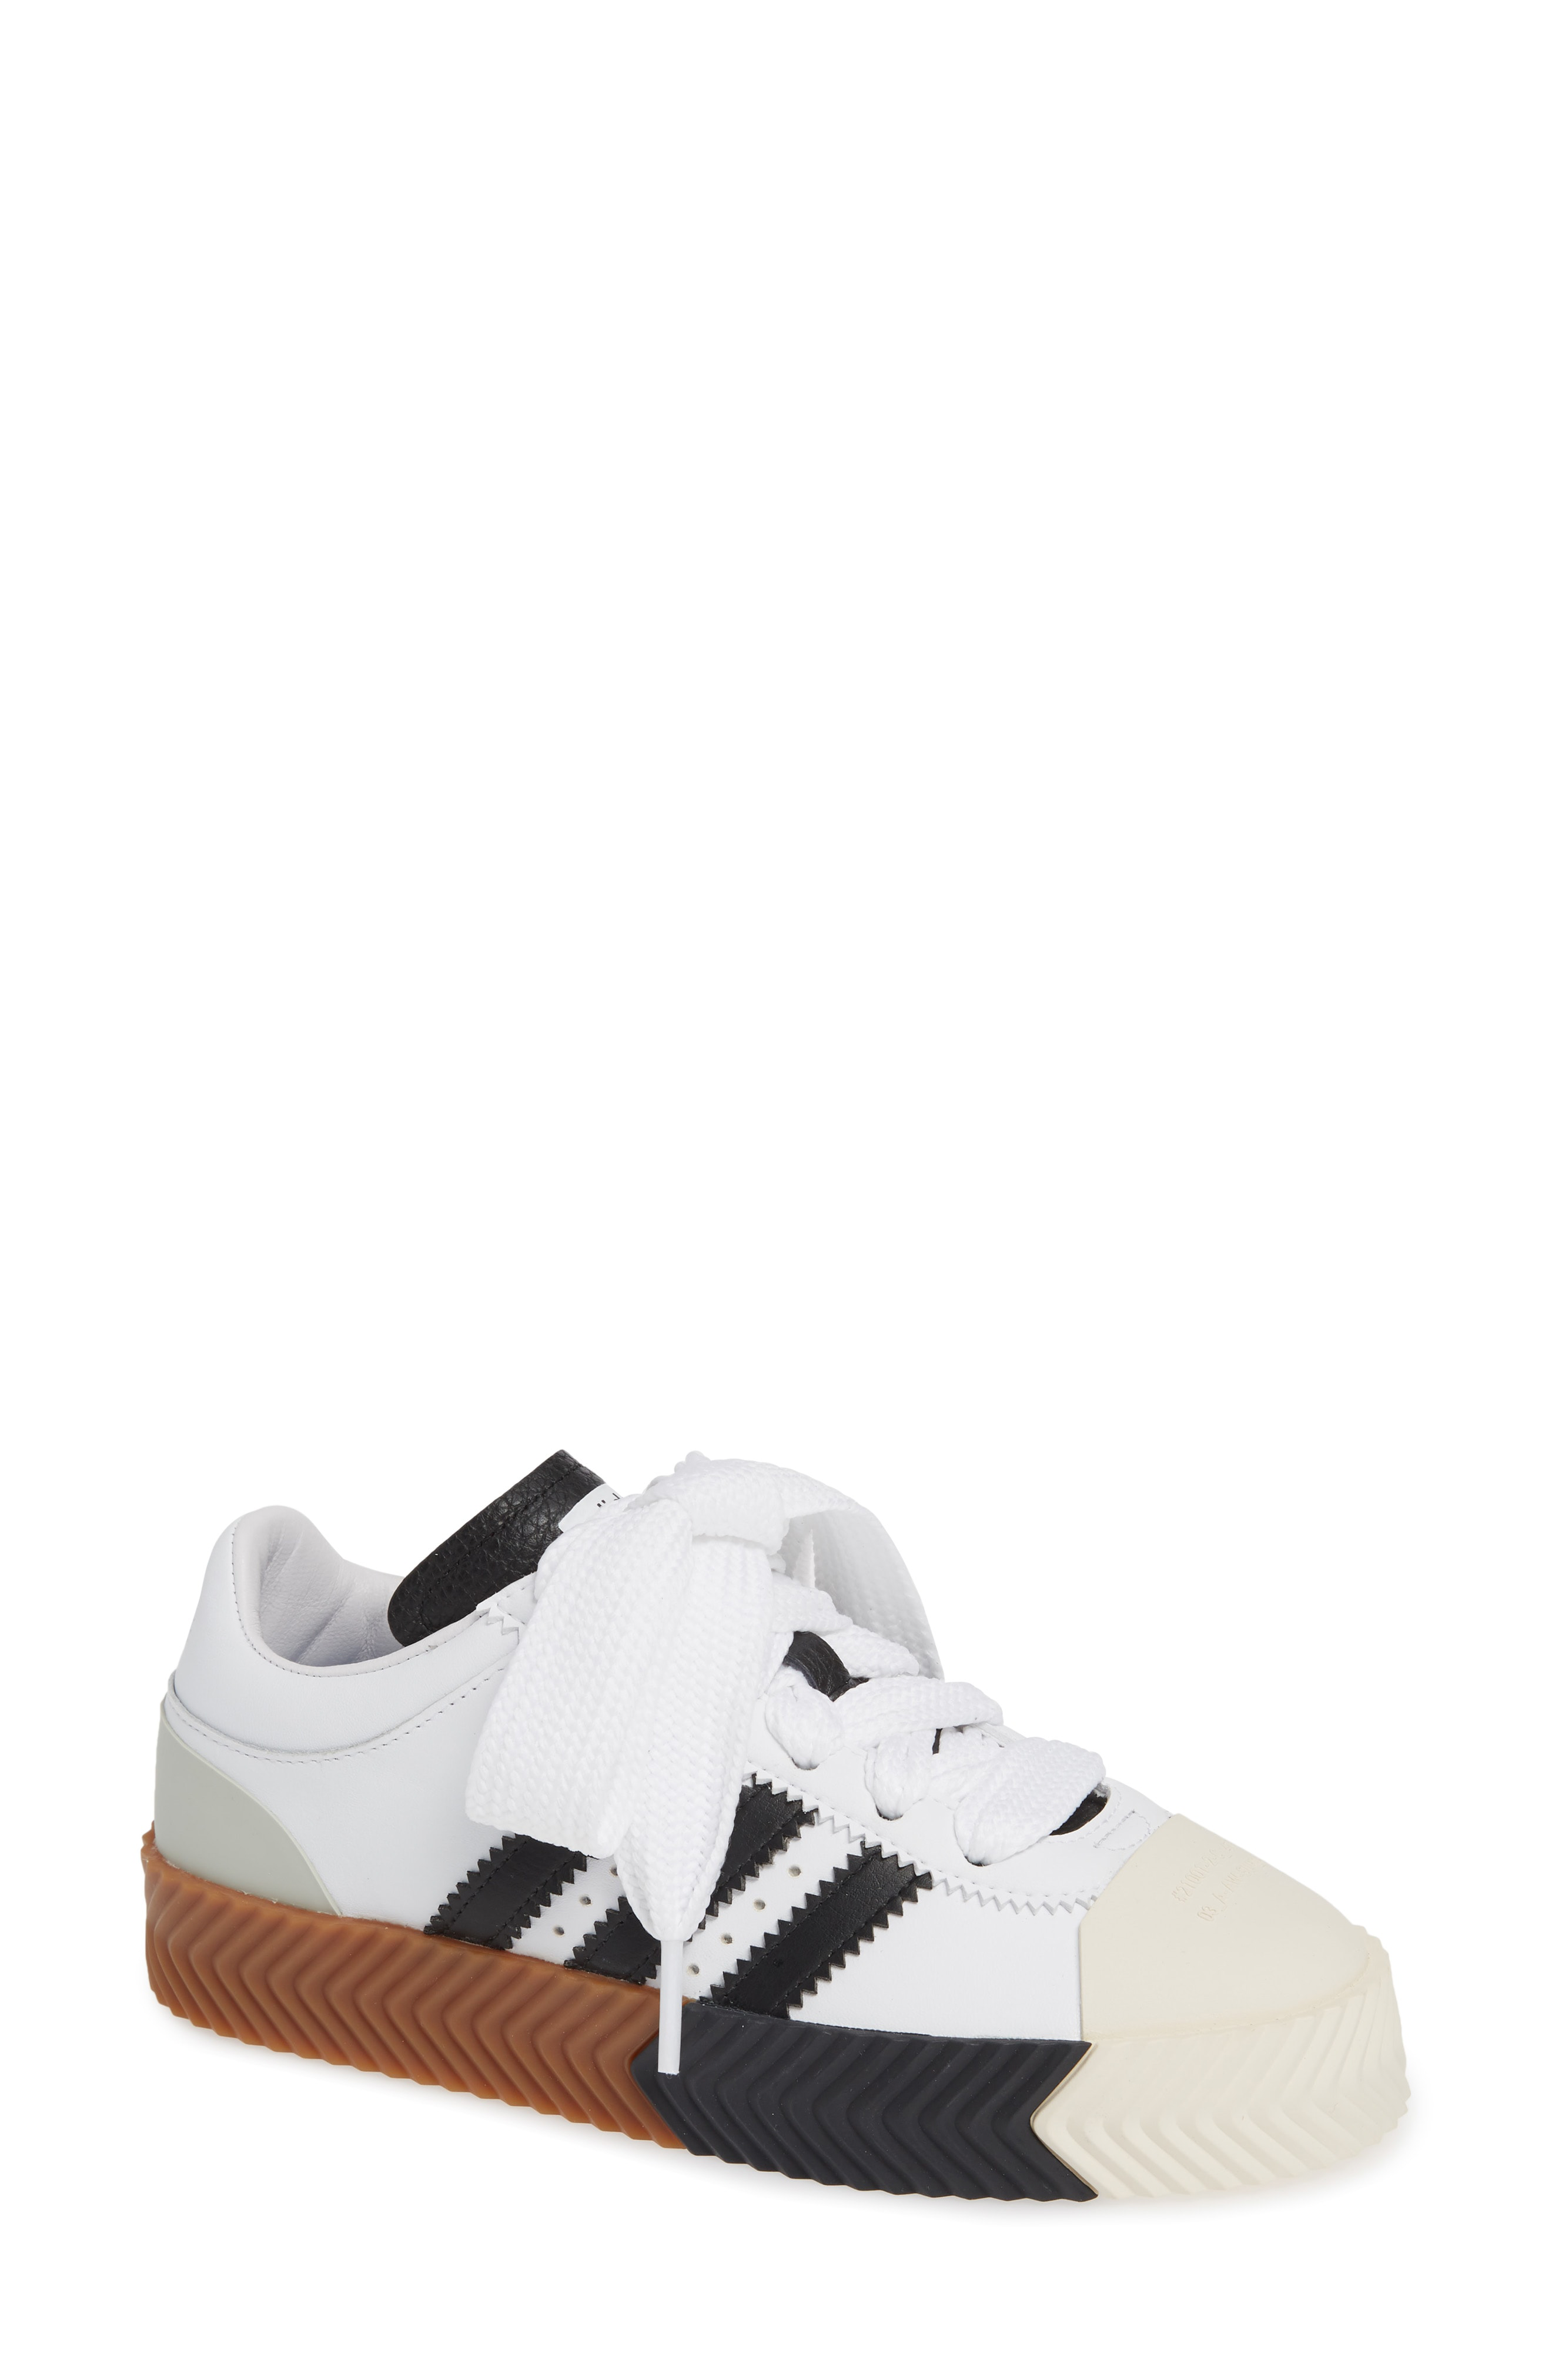 adidas originals by alexander wang skate super, super sell Save 68%  available - statehouse.gov.sl